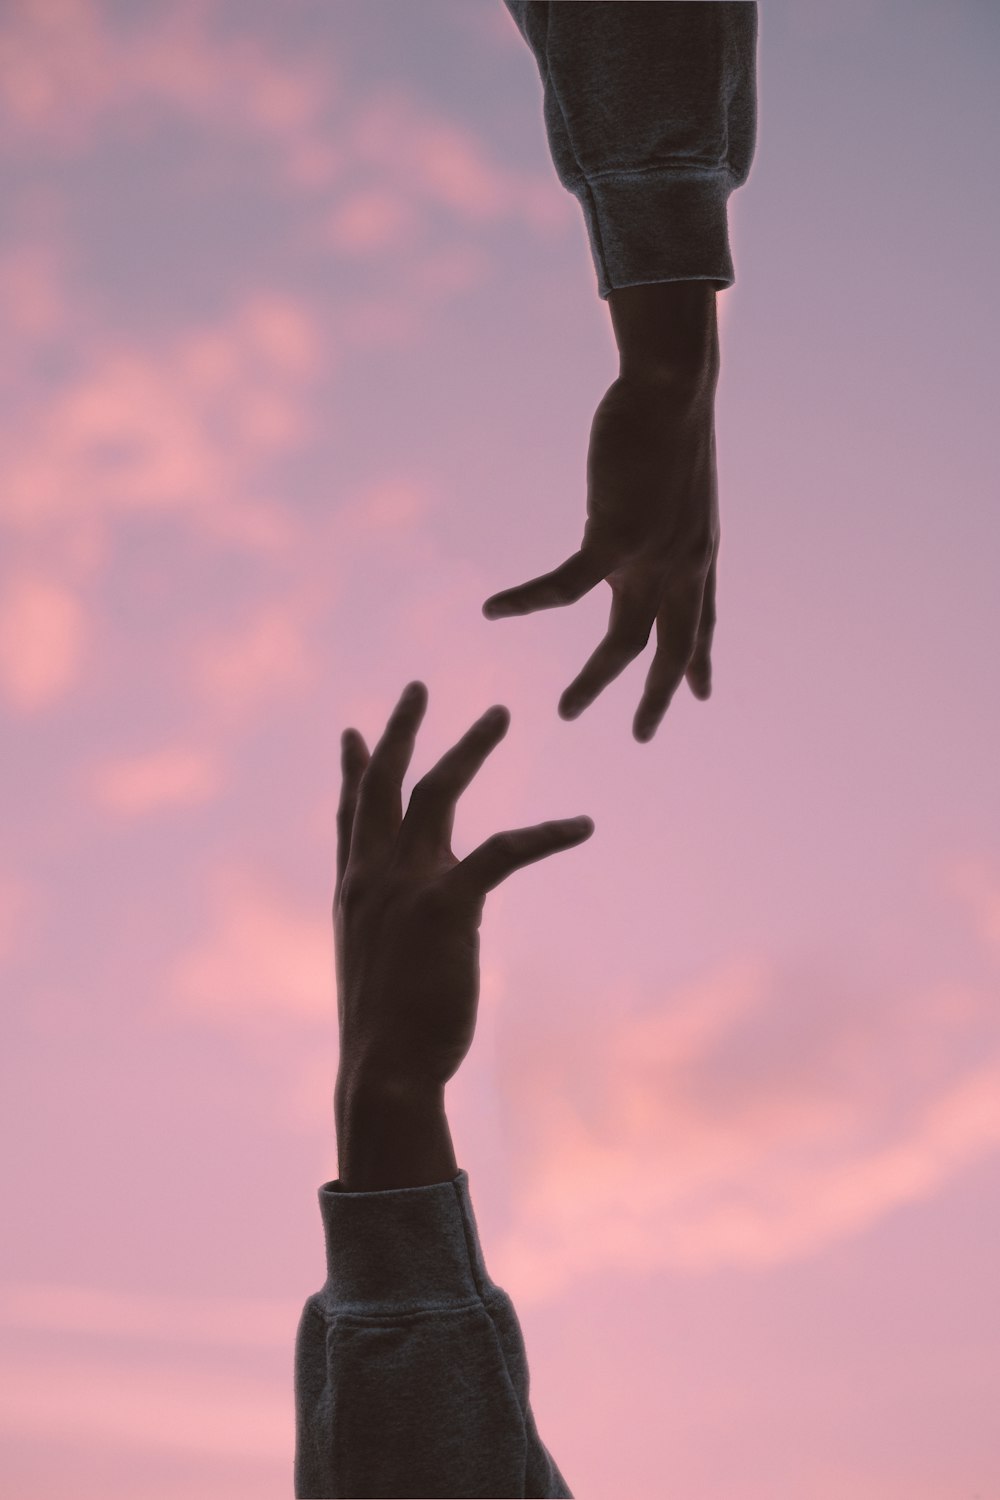 two hands reaching towards each other in front of a pink sky